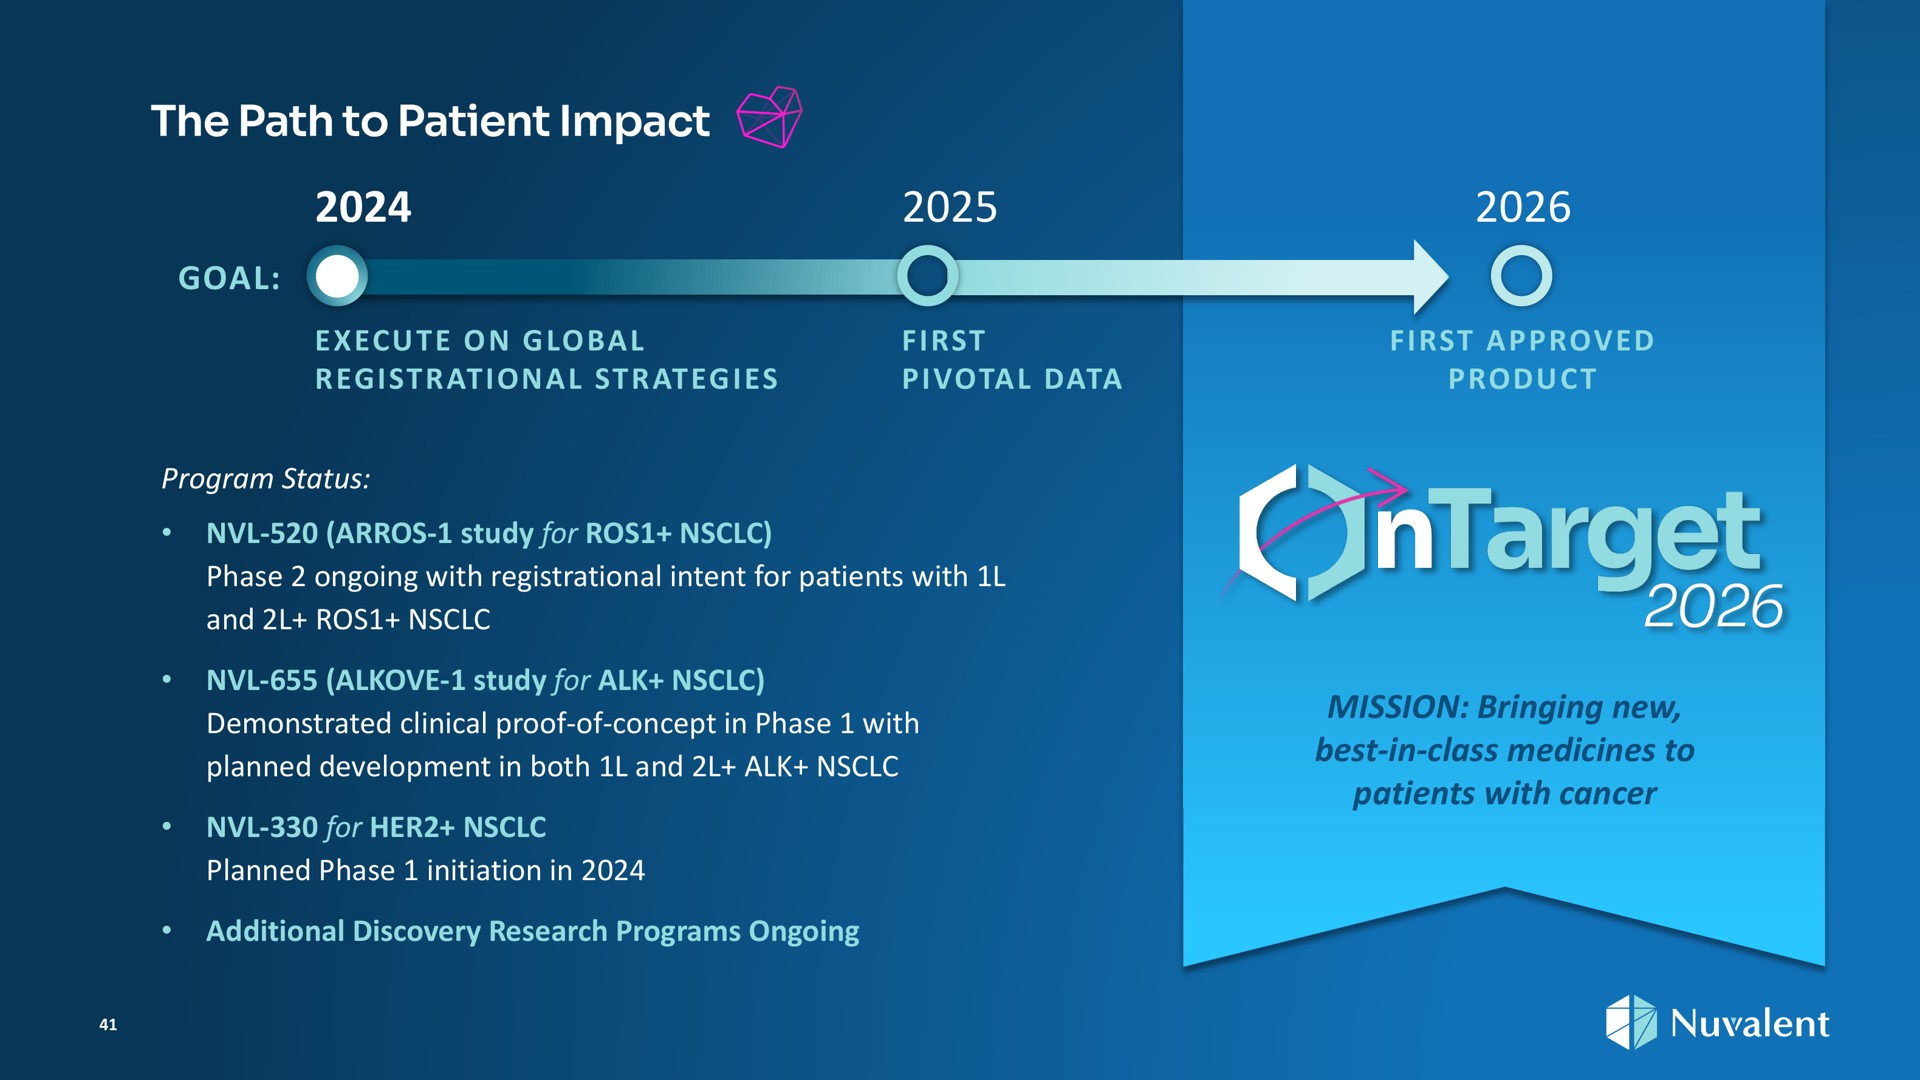 the path to patient impact ams execute on global registrational strategies pivotal data program status study for phase ongoing with registrational intent for patients with and study for alk demonstrated clinical proof of concept in phase with planned development in both and alk for her planned phase initiation in additional discovery research programs ongoing first approved product mission bringing new best in class medicines to patients with cancer i | Nuvalent